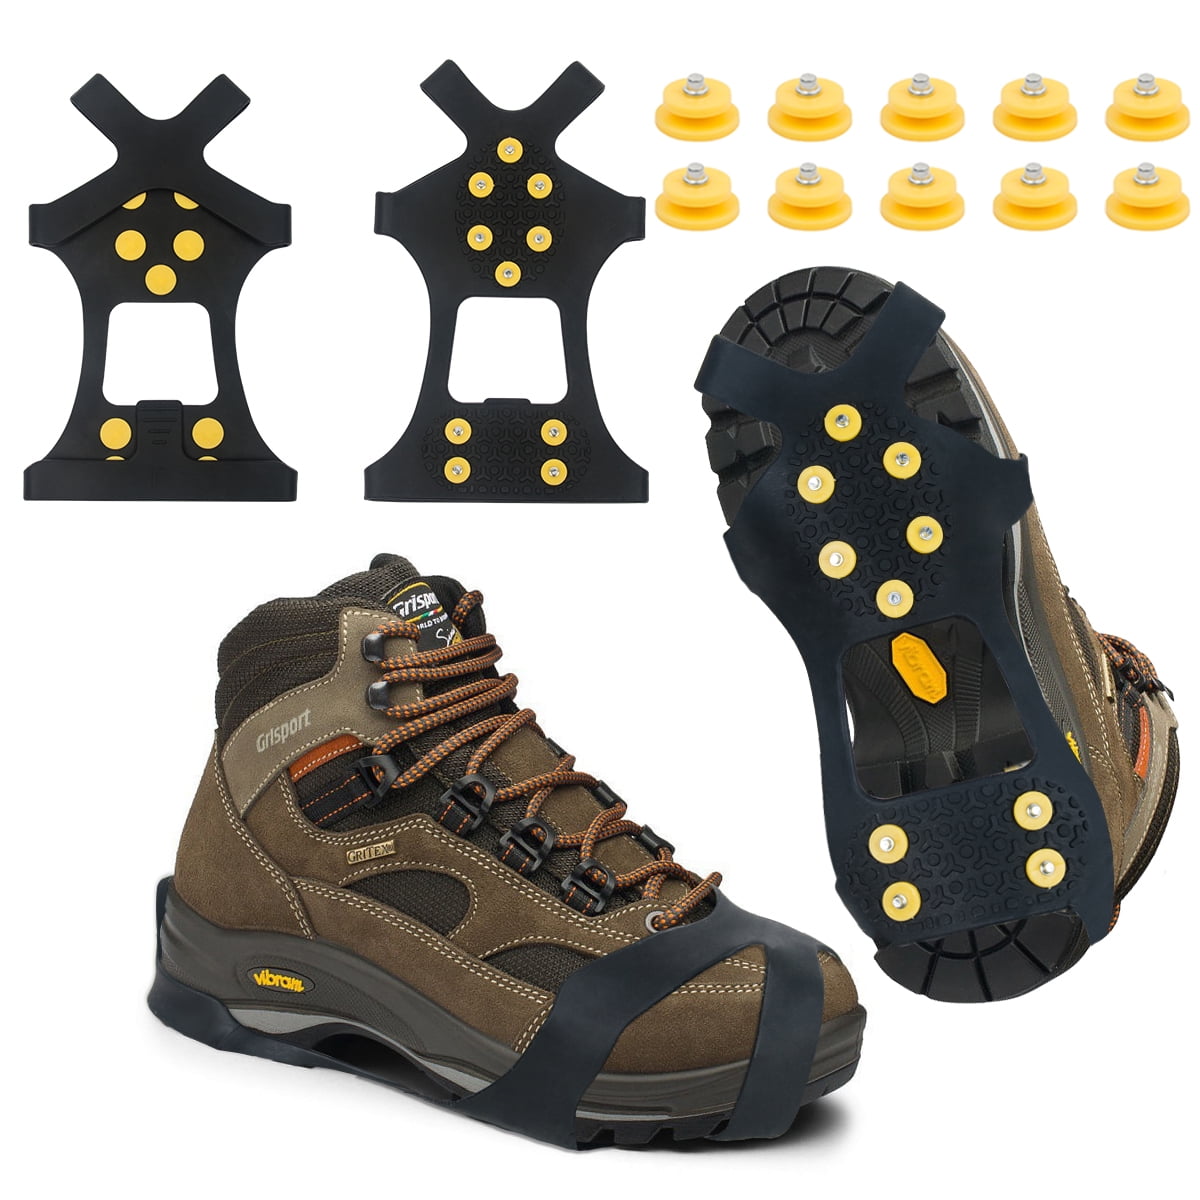 Anti-Slip Ice & Snow Grips Shoes Traction Cleats 10 Teeth Steel Studs Stretchable Ice Grippers Safe Protect for Walk on Ice Snow Freezing Mud Ground Winter Walking Hiking Mountaineering 